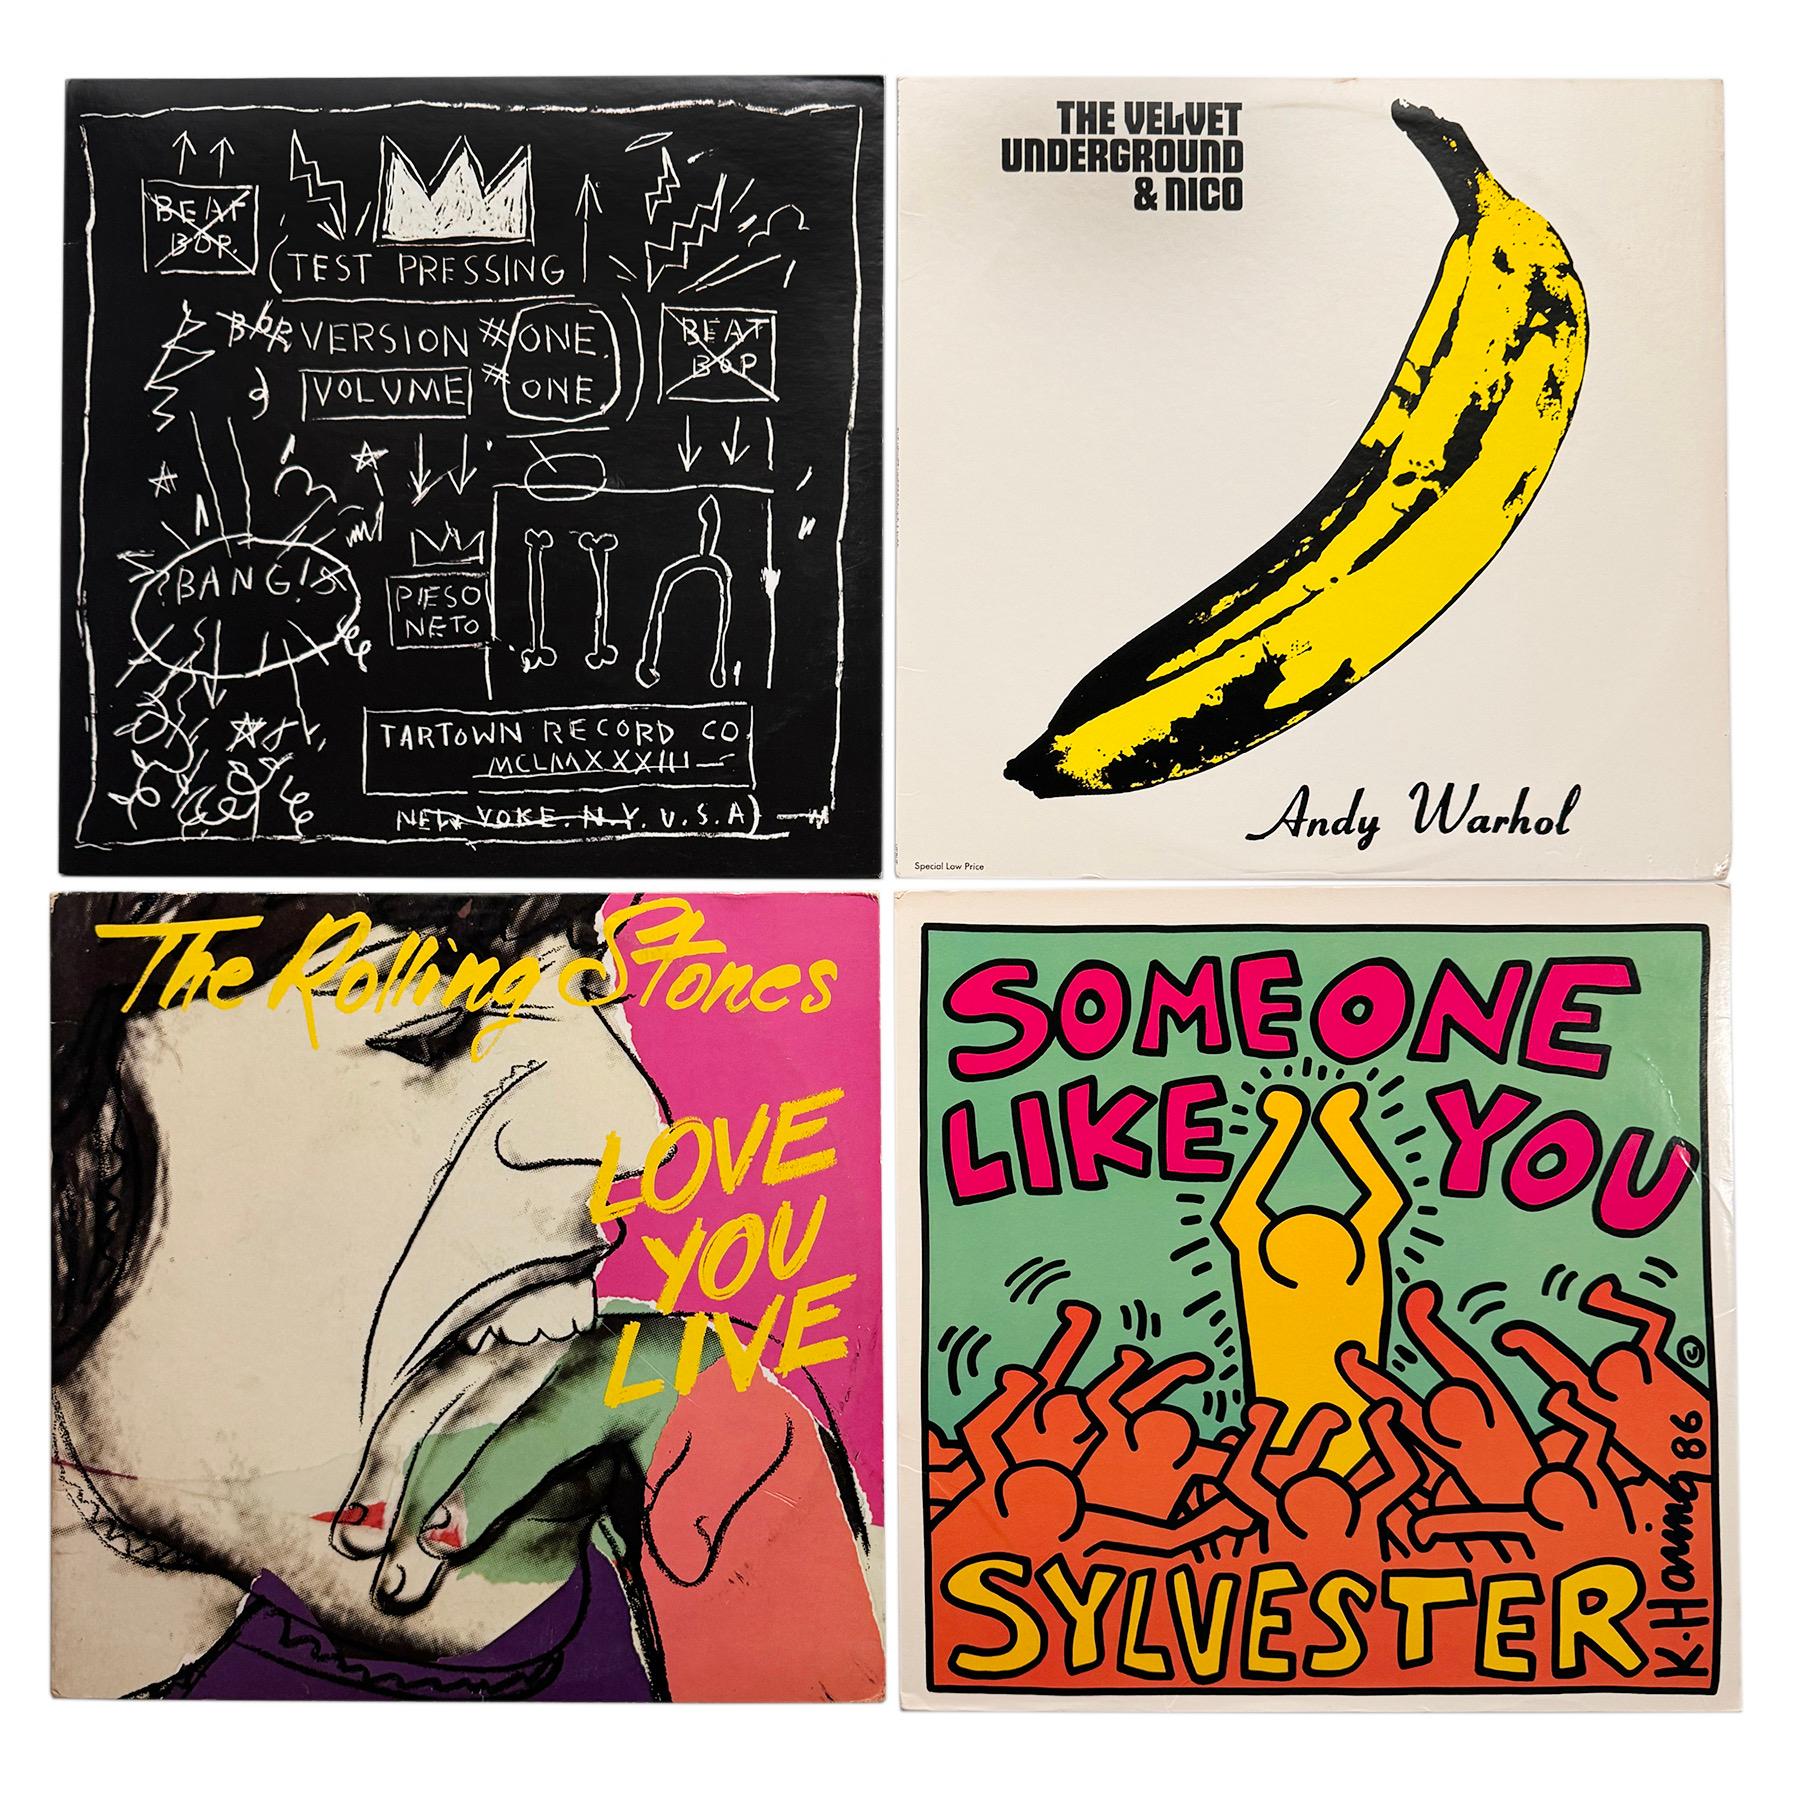 Basquiat Haring and Warhol Designed Record Covers - Art by Andy Warhol